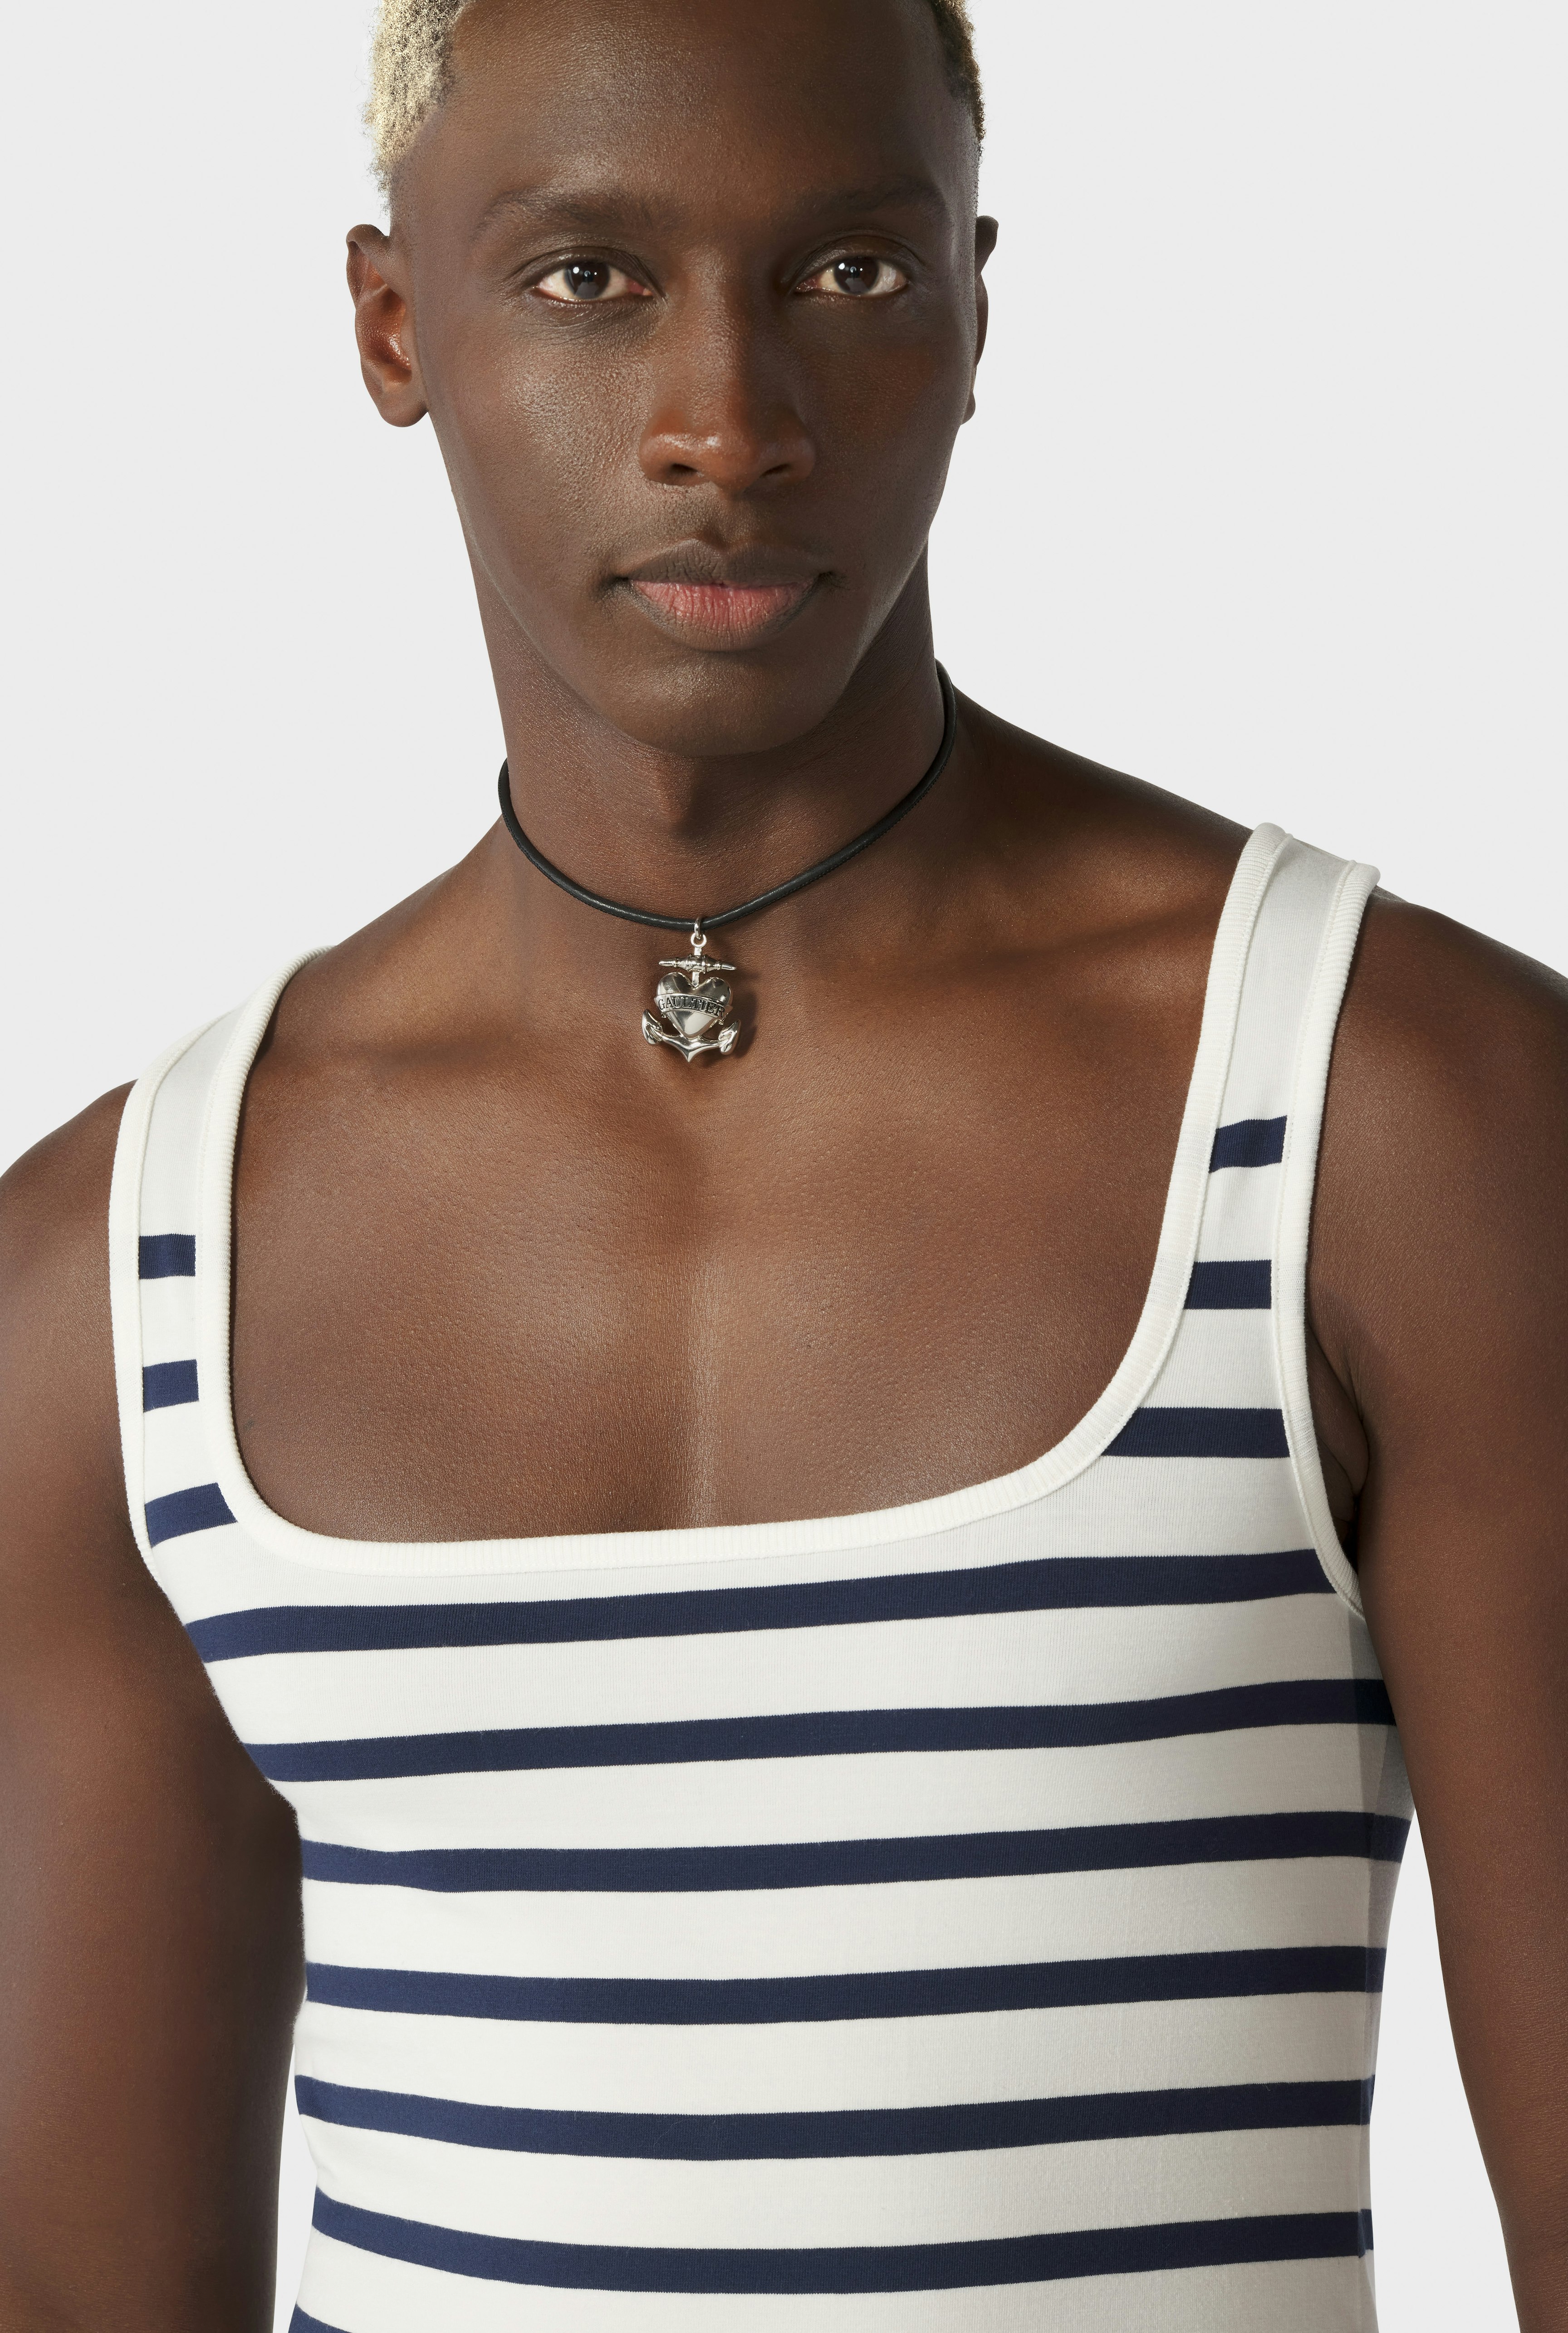 The Sailor Tank Top for Him